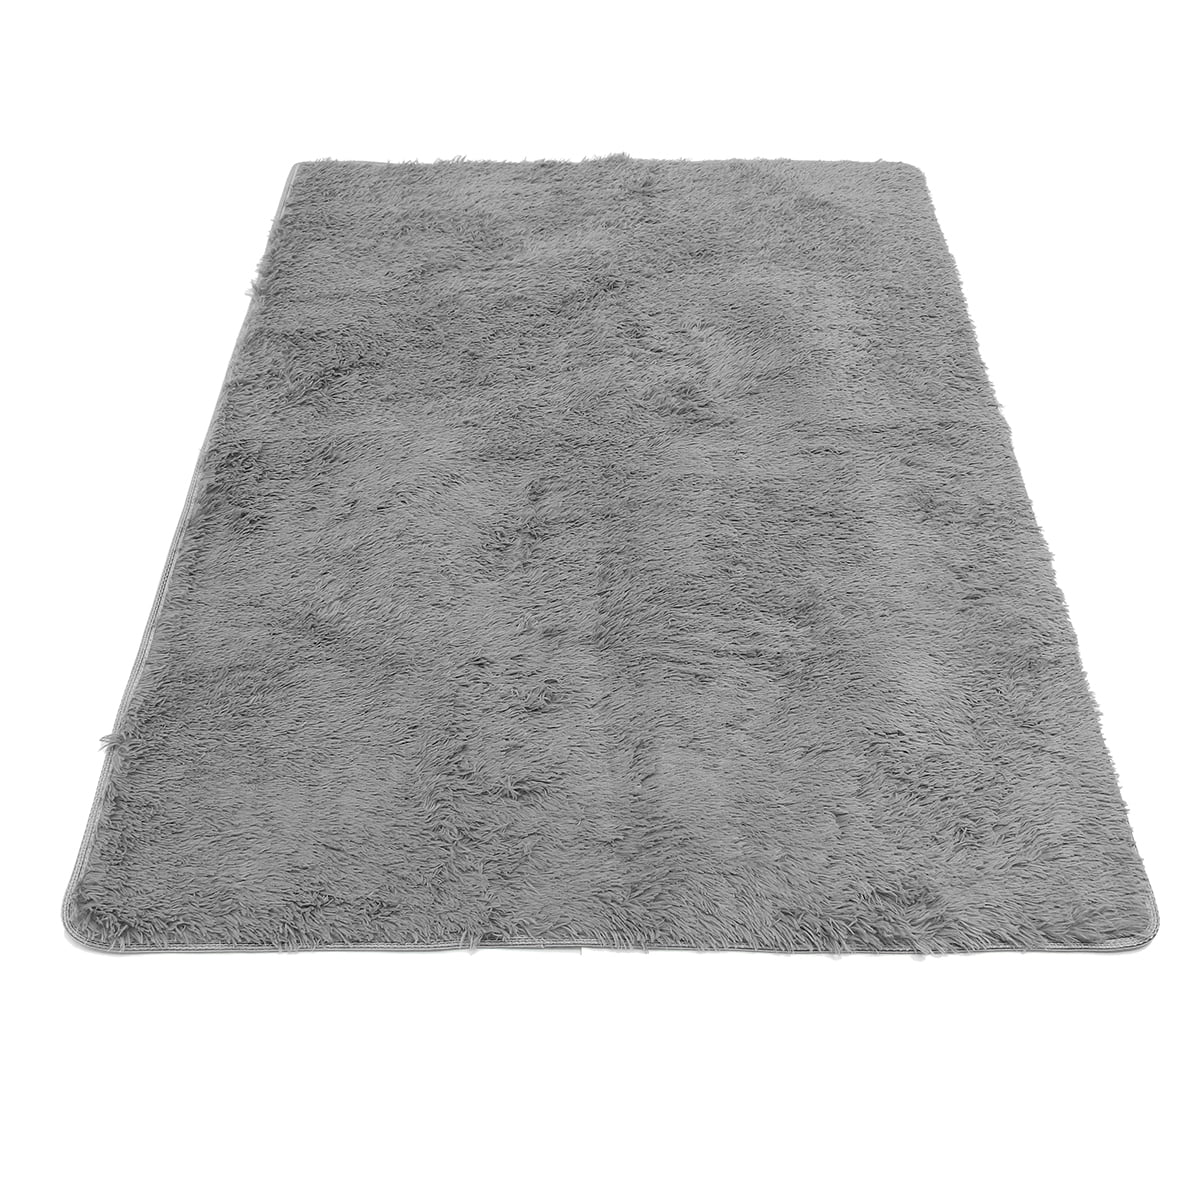 CHEAP SOFT RUGS SHAGGY 5cm BLACK HIGH QUALITY nice in touch CARPETS MANY SIZE 